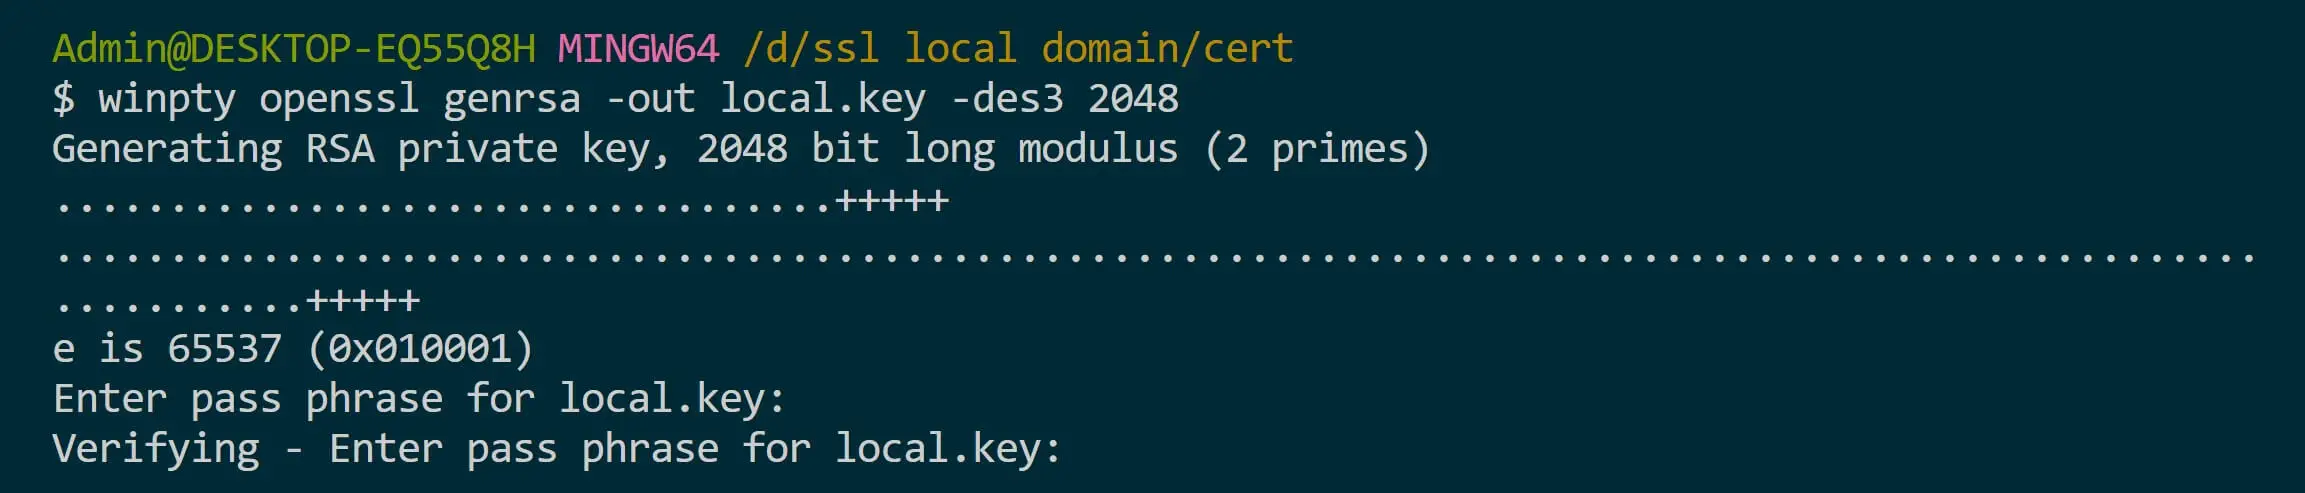 Add localHost Domain HTTPS with Let’s Encrypt SSL Certificate Issuer - SelfSigned